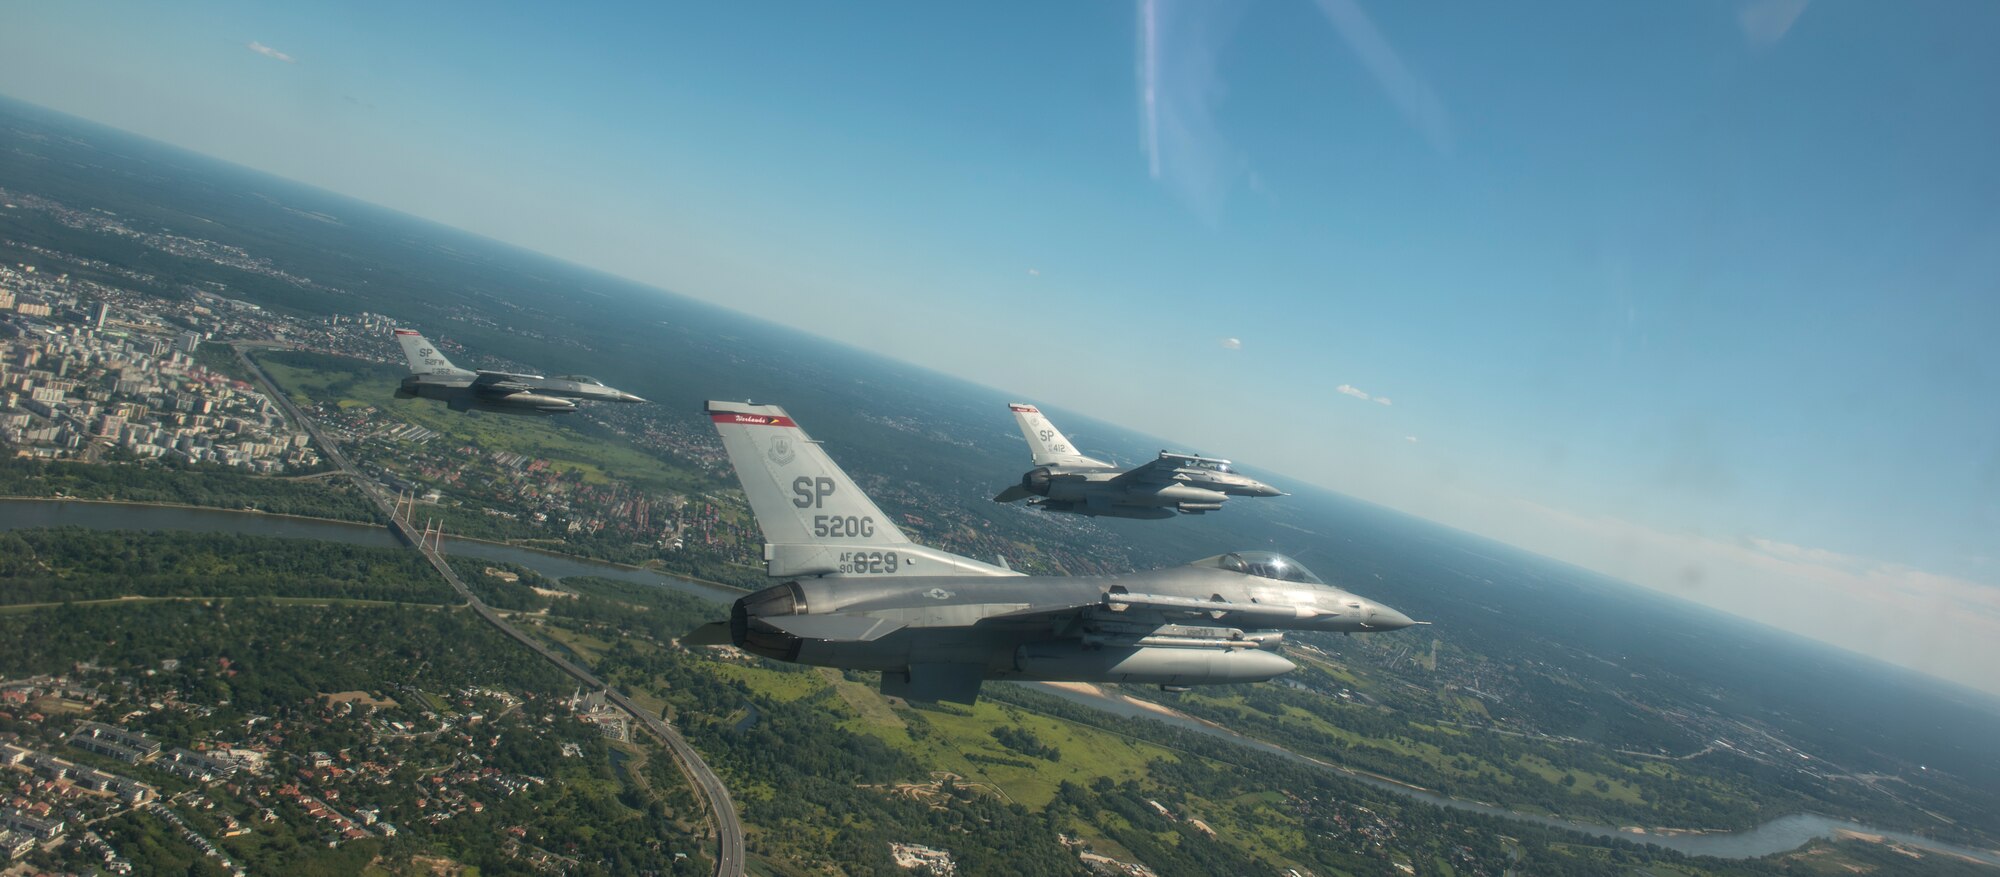 U.S. Air Force F-16 Fighting Falcons, assigned to the 480th Expeditionary Fighter Squadron, participate in a flyover during Polish Armed Forces Day at Warsaw, Poland, August 15,2020.  Participation in the Polish Armed Forces Day is one of several ways the U.S. is continuing to work with Polish allies to strengthen U.S. and Polish defense relations, NATO unity and transatlantic security. (U.S. Air Force photo by Senior Airman Chanceler Nardone)